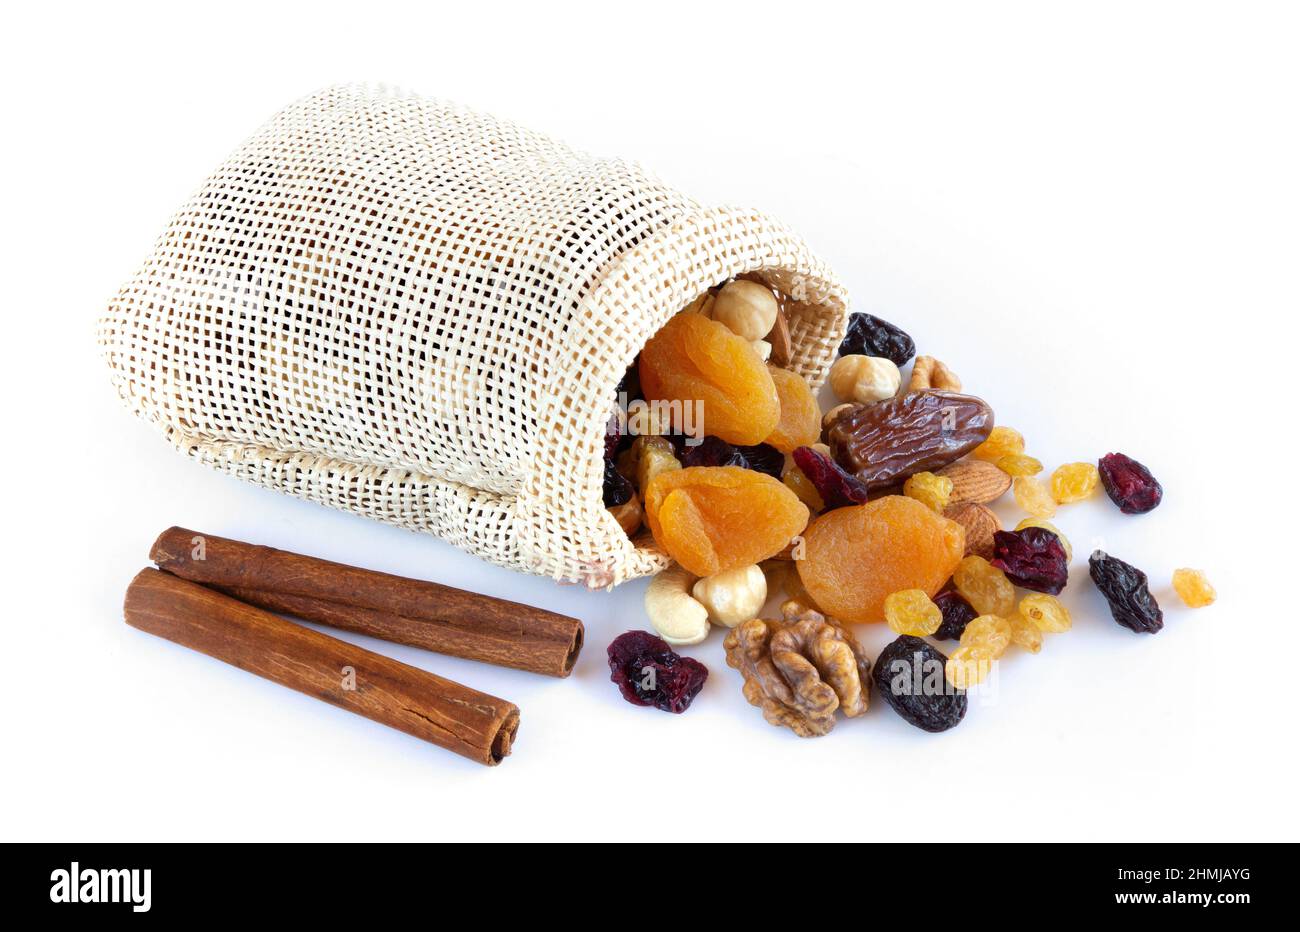 Dried fruits and nuts in a sack on white background Stock Photo